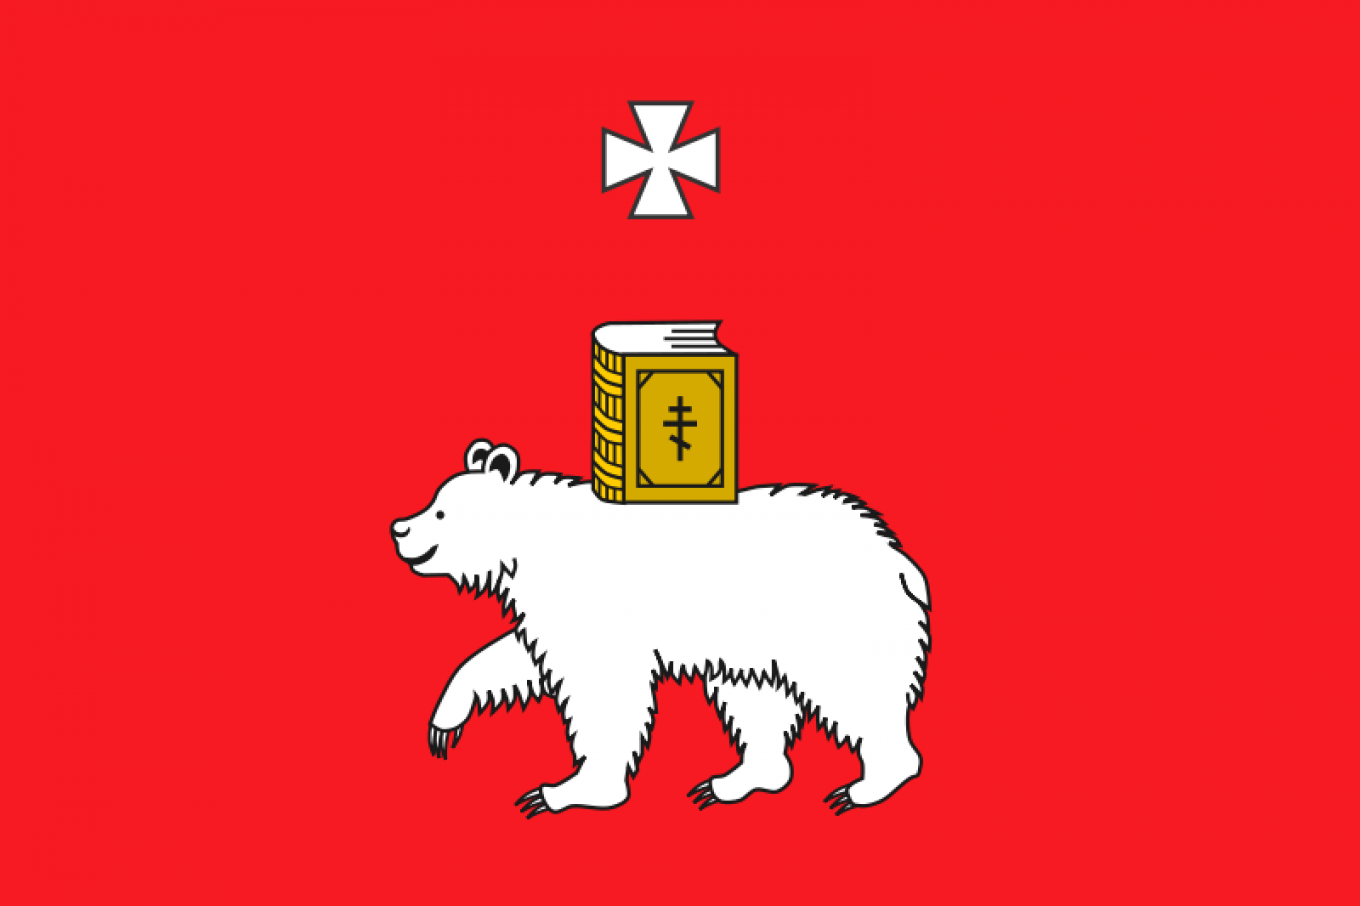 Russia’s Weird and Splendid Regional Flags and Сoats of Arms